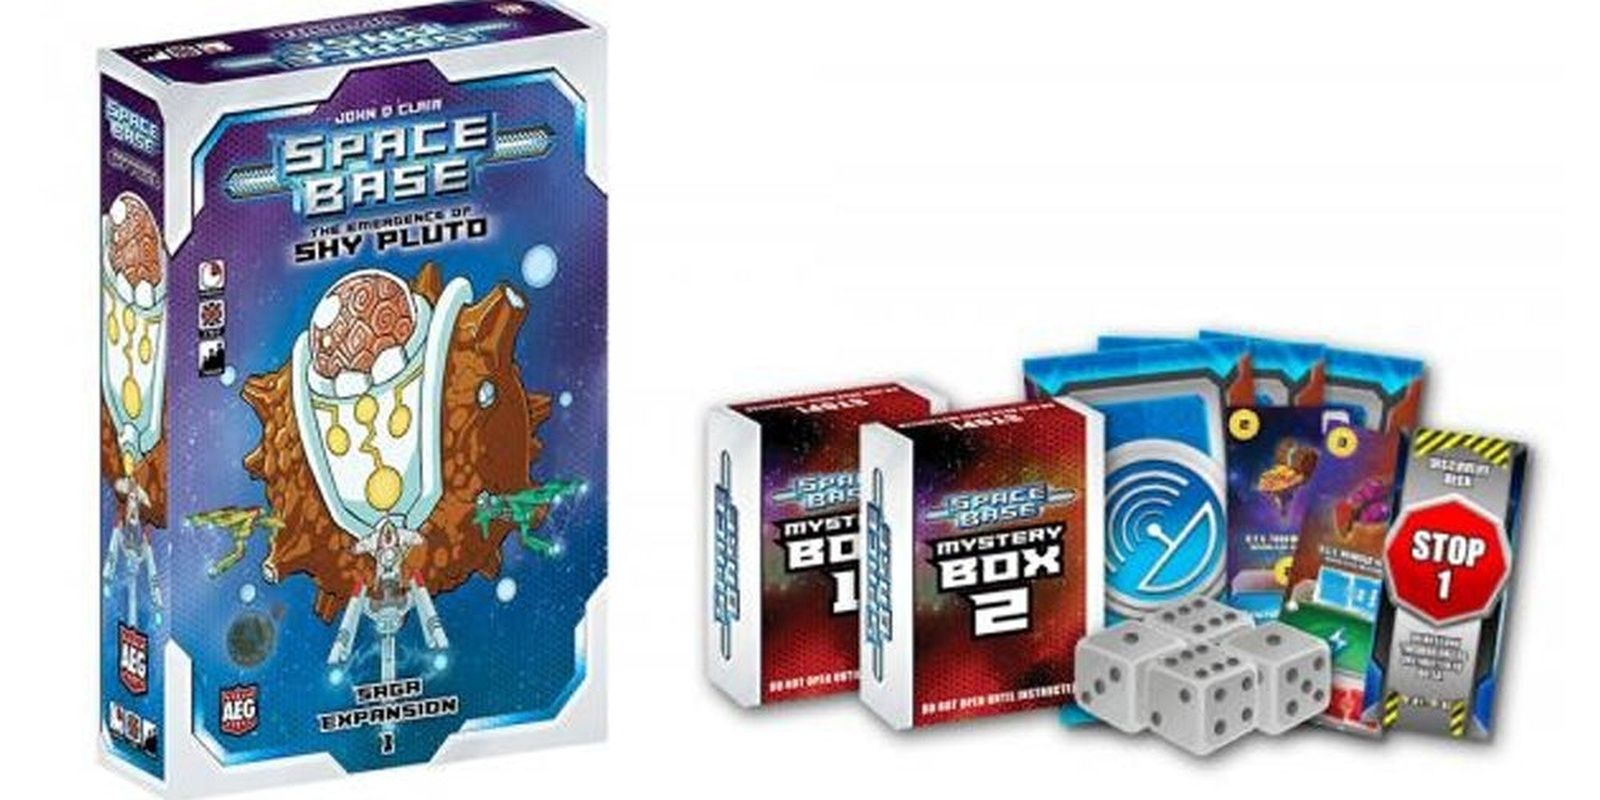 Space Base The Emergence Of Shy Pluto Board Game Expansion Components